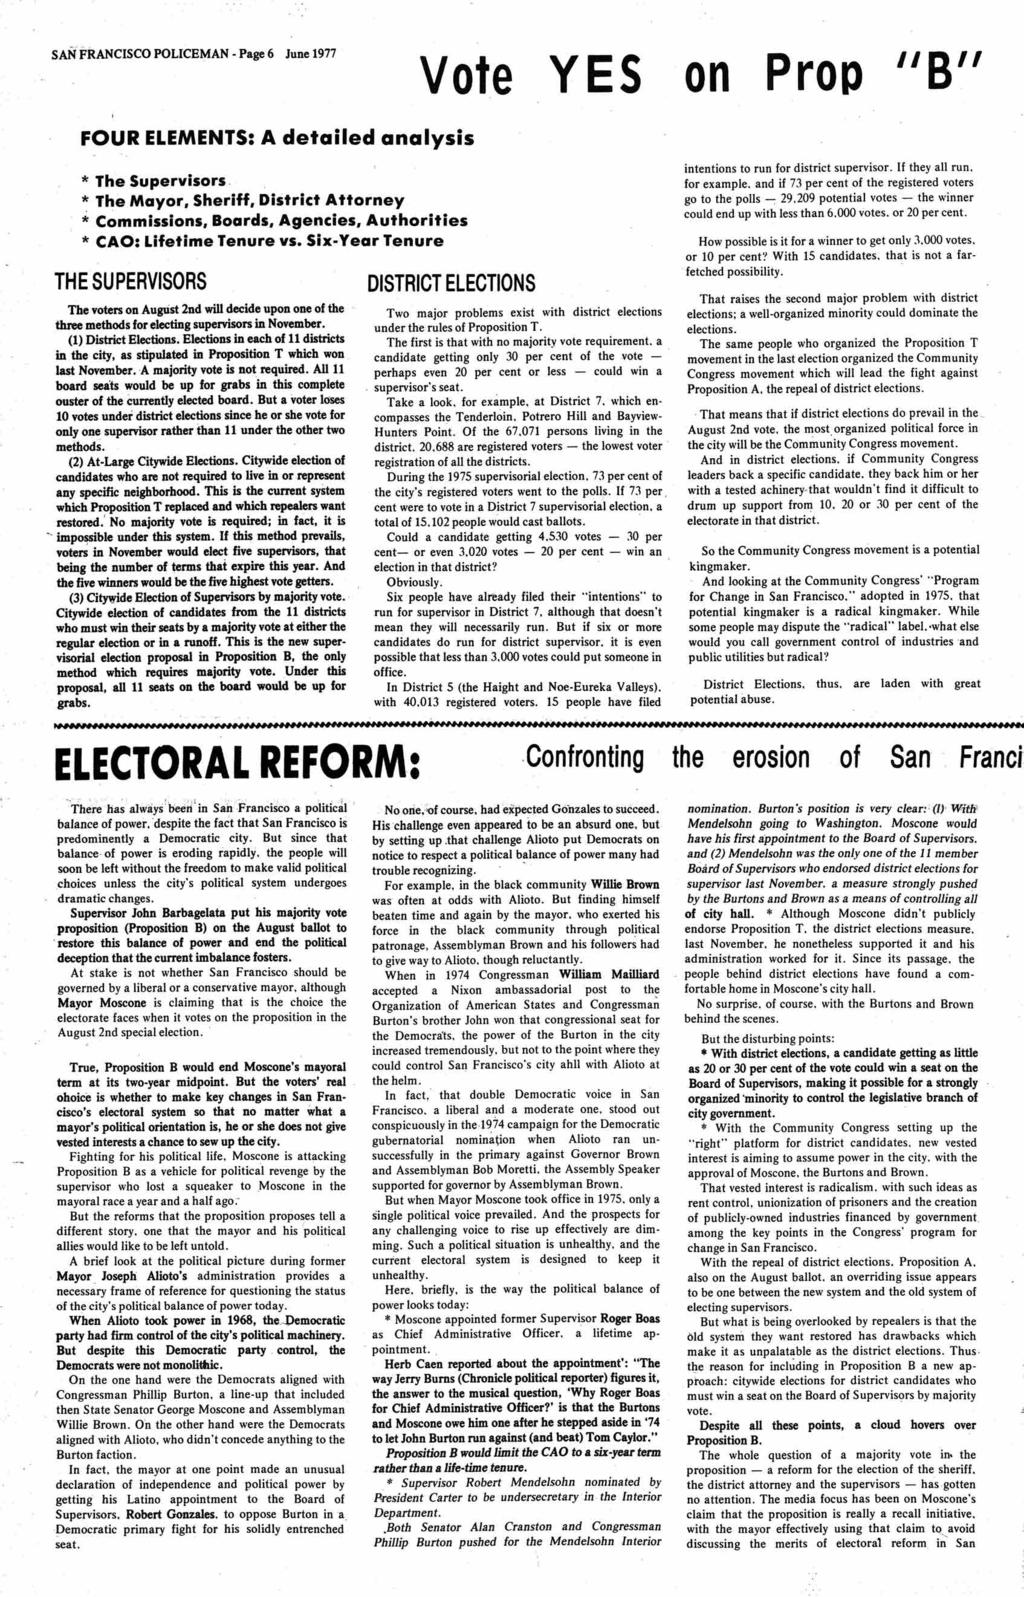 SAN FRANCSCO POLCEMAN - Page 6 June 1977 Vote YES on Prop "B" FOUR ELEMENTS: A detailed analysis The Supervisors.